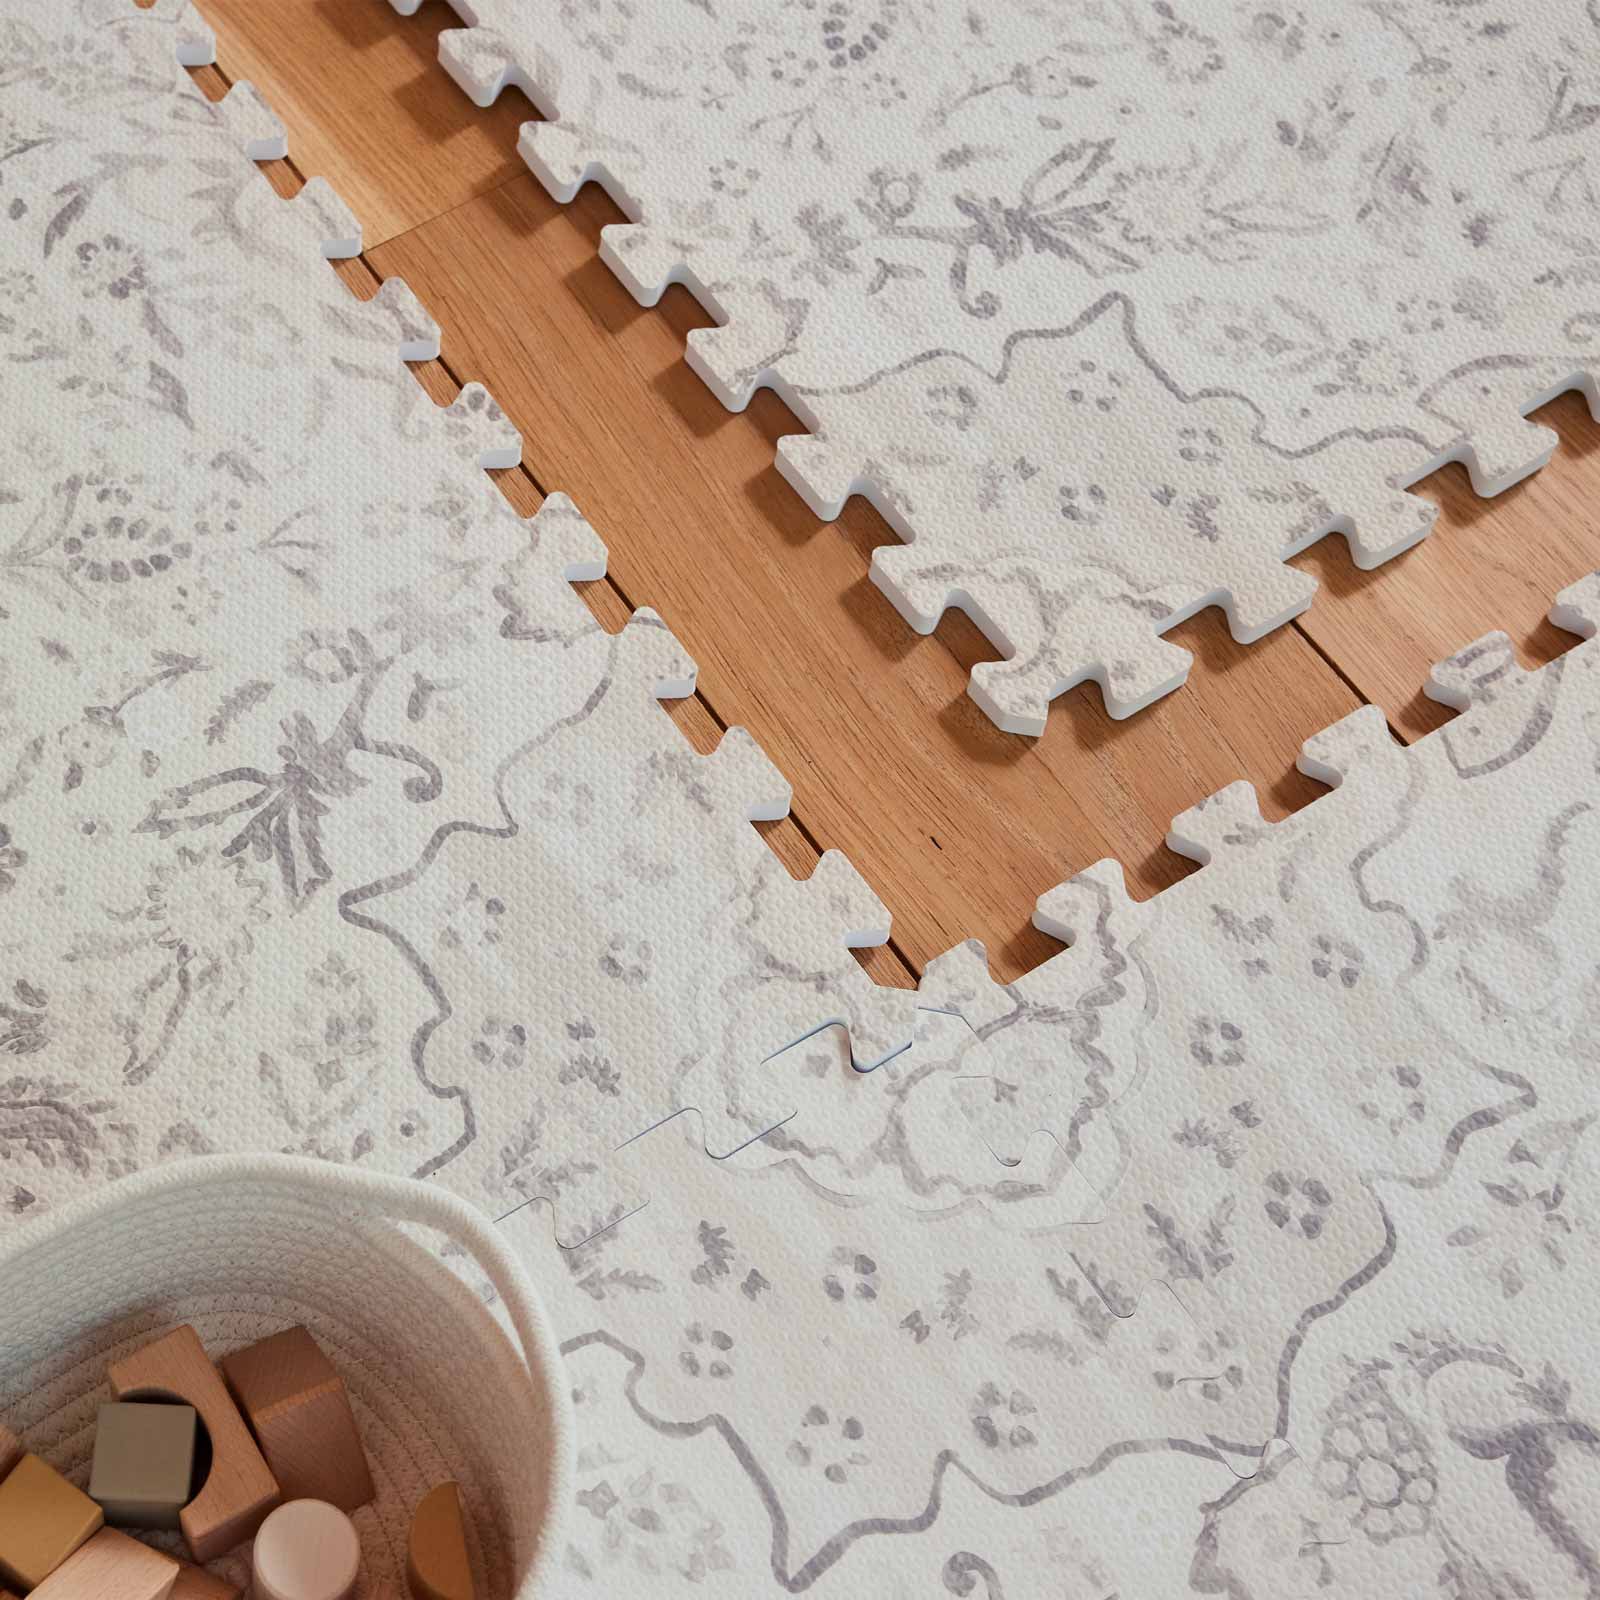 Emile latte neutral floral play mat shown up close with 1 tile exposed and a basket of wooden blocks